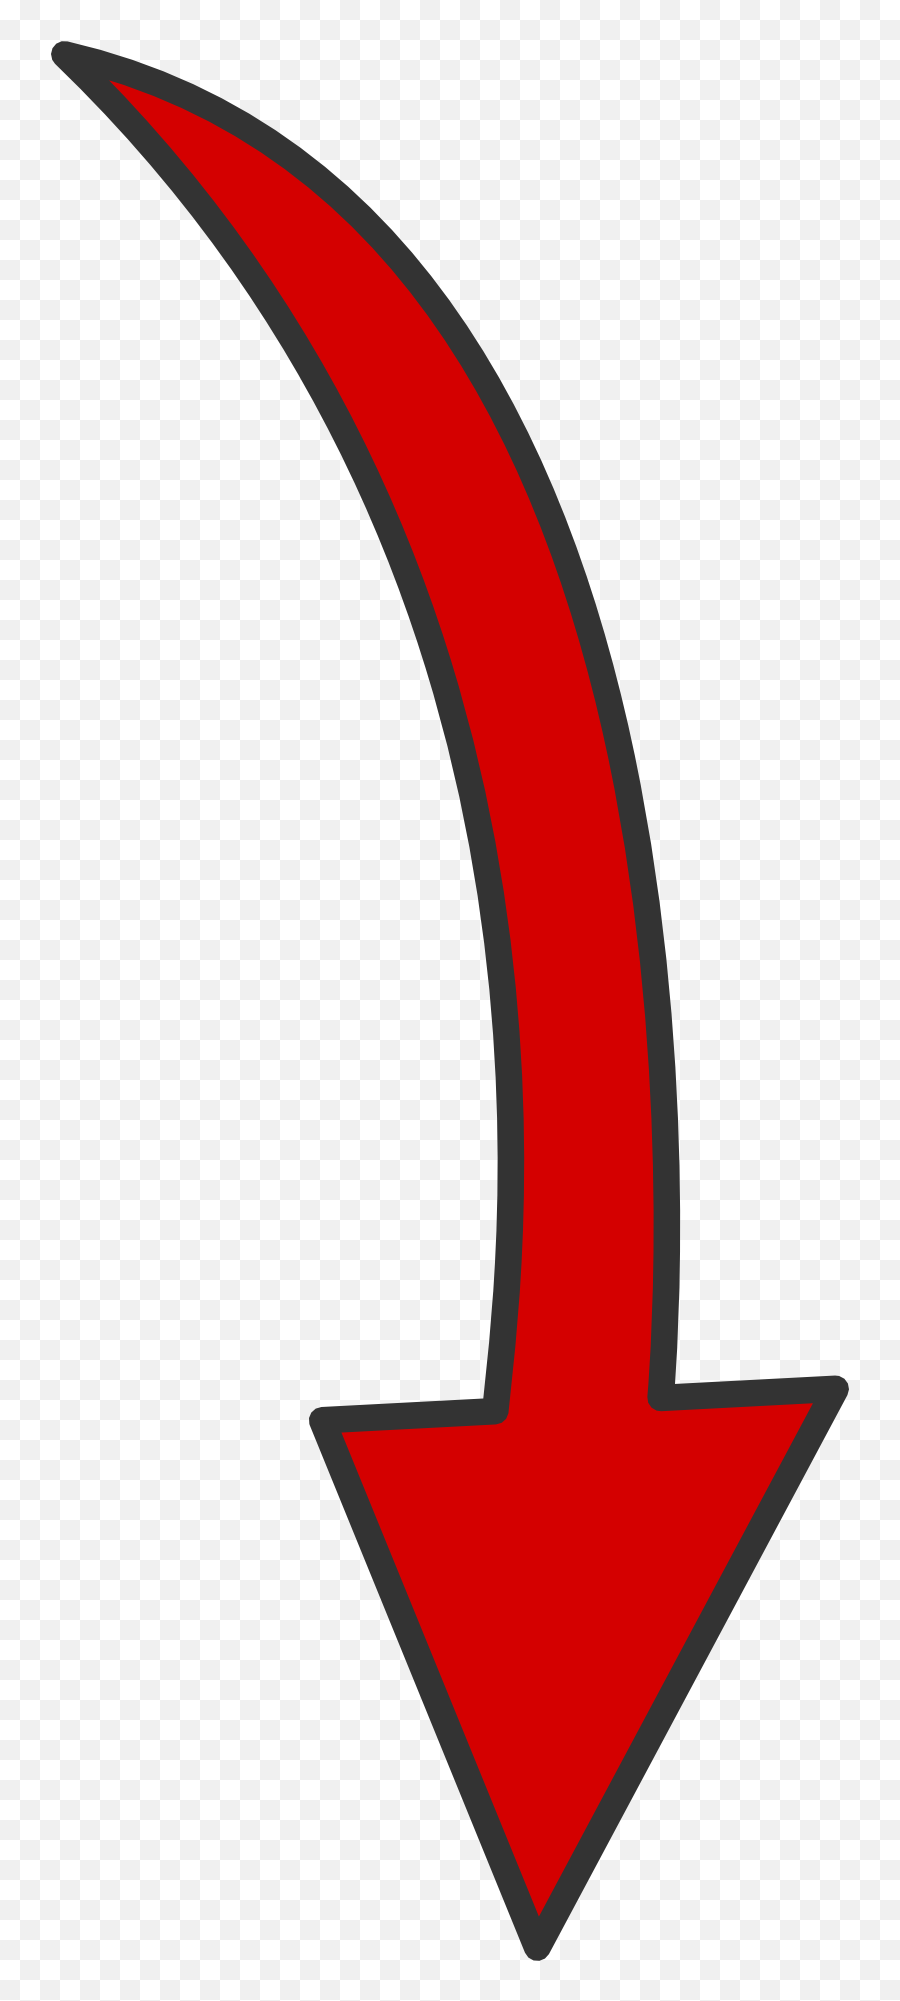 Curved Down Arrow Clipart Free Image - Curved Arrow Png Emoji,Arrow Clipart